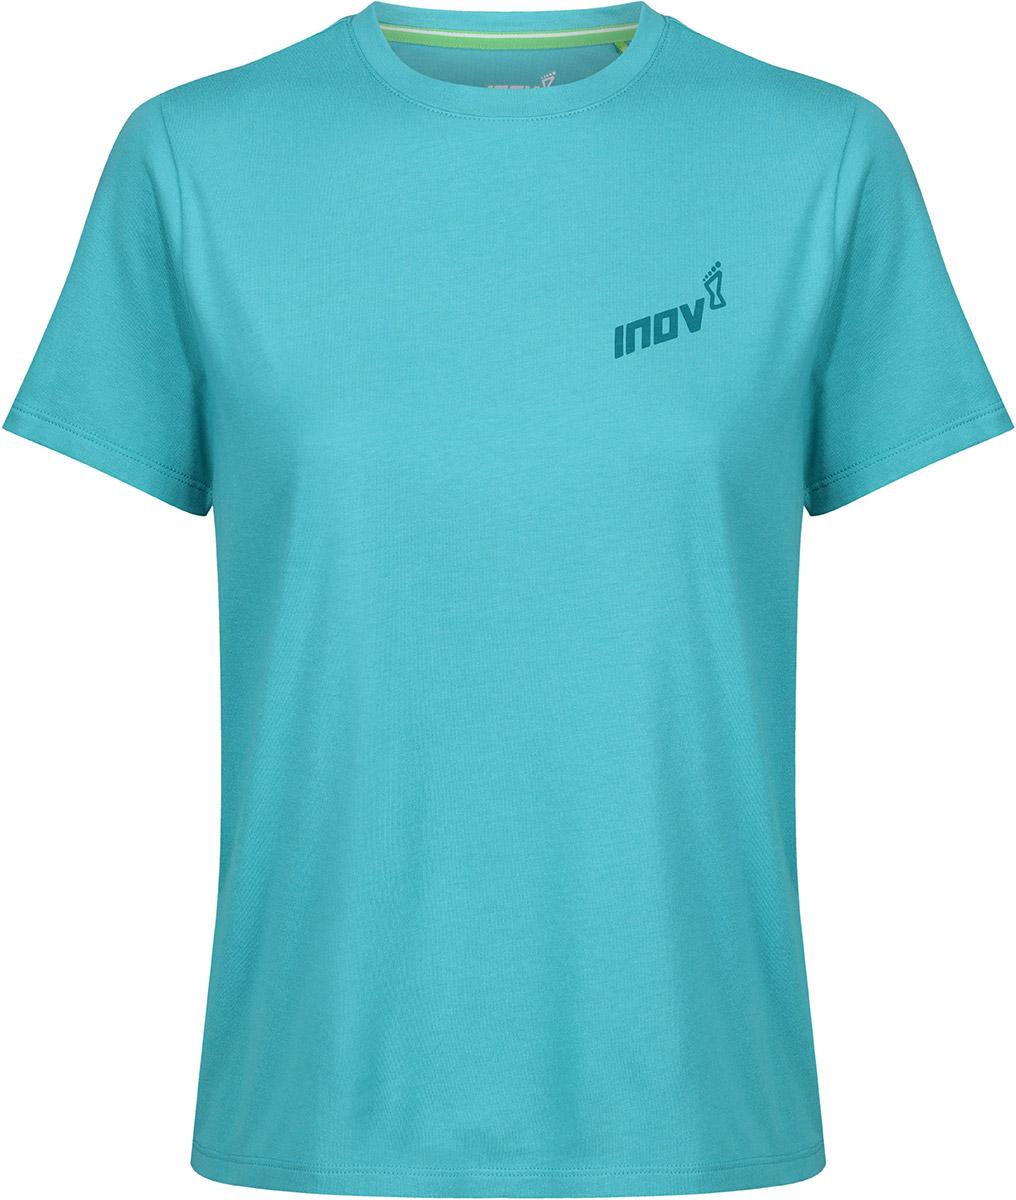 Inov-8 Womens Forged Graphic Short Sleeve Tee - Teal